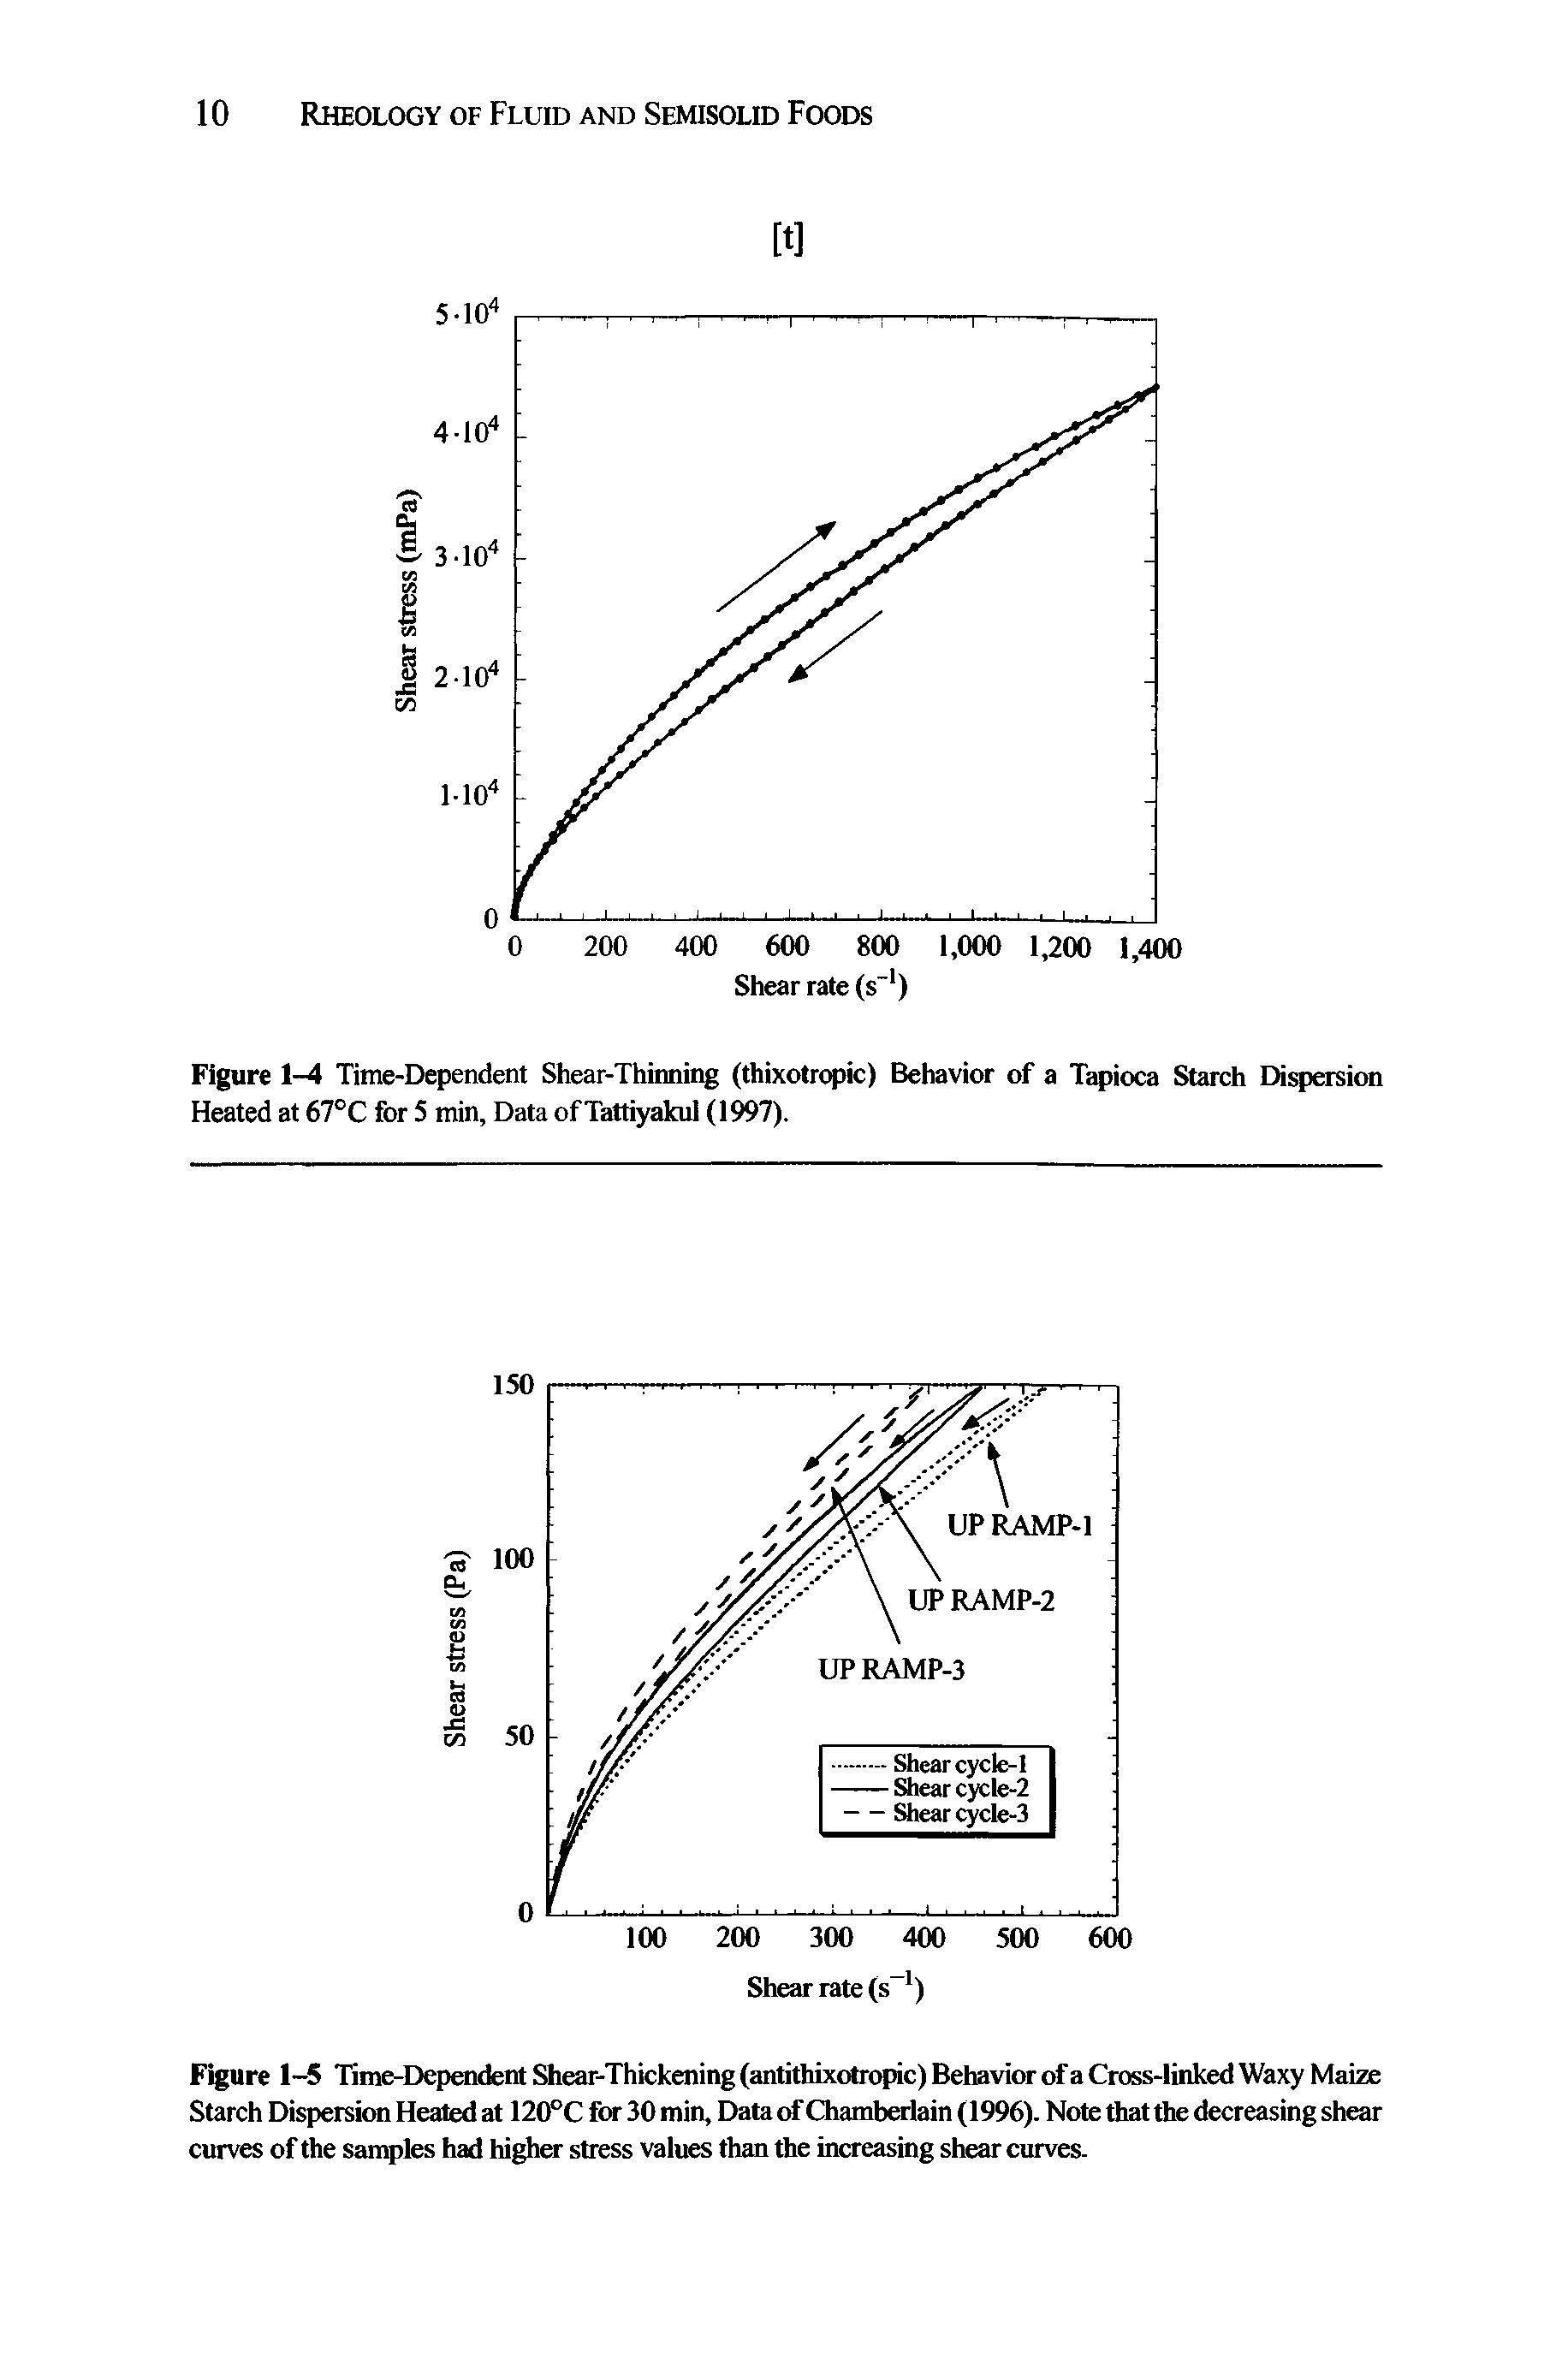 Figure 1-4 Time-Dependent Shear-Thinning (thixotropic) Behavior of a Tapioca Starch Dispersion Heated at 67°C for 5 min. Data of Tattiyakul (1997).